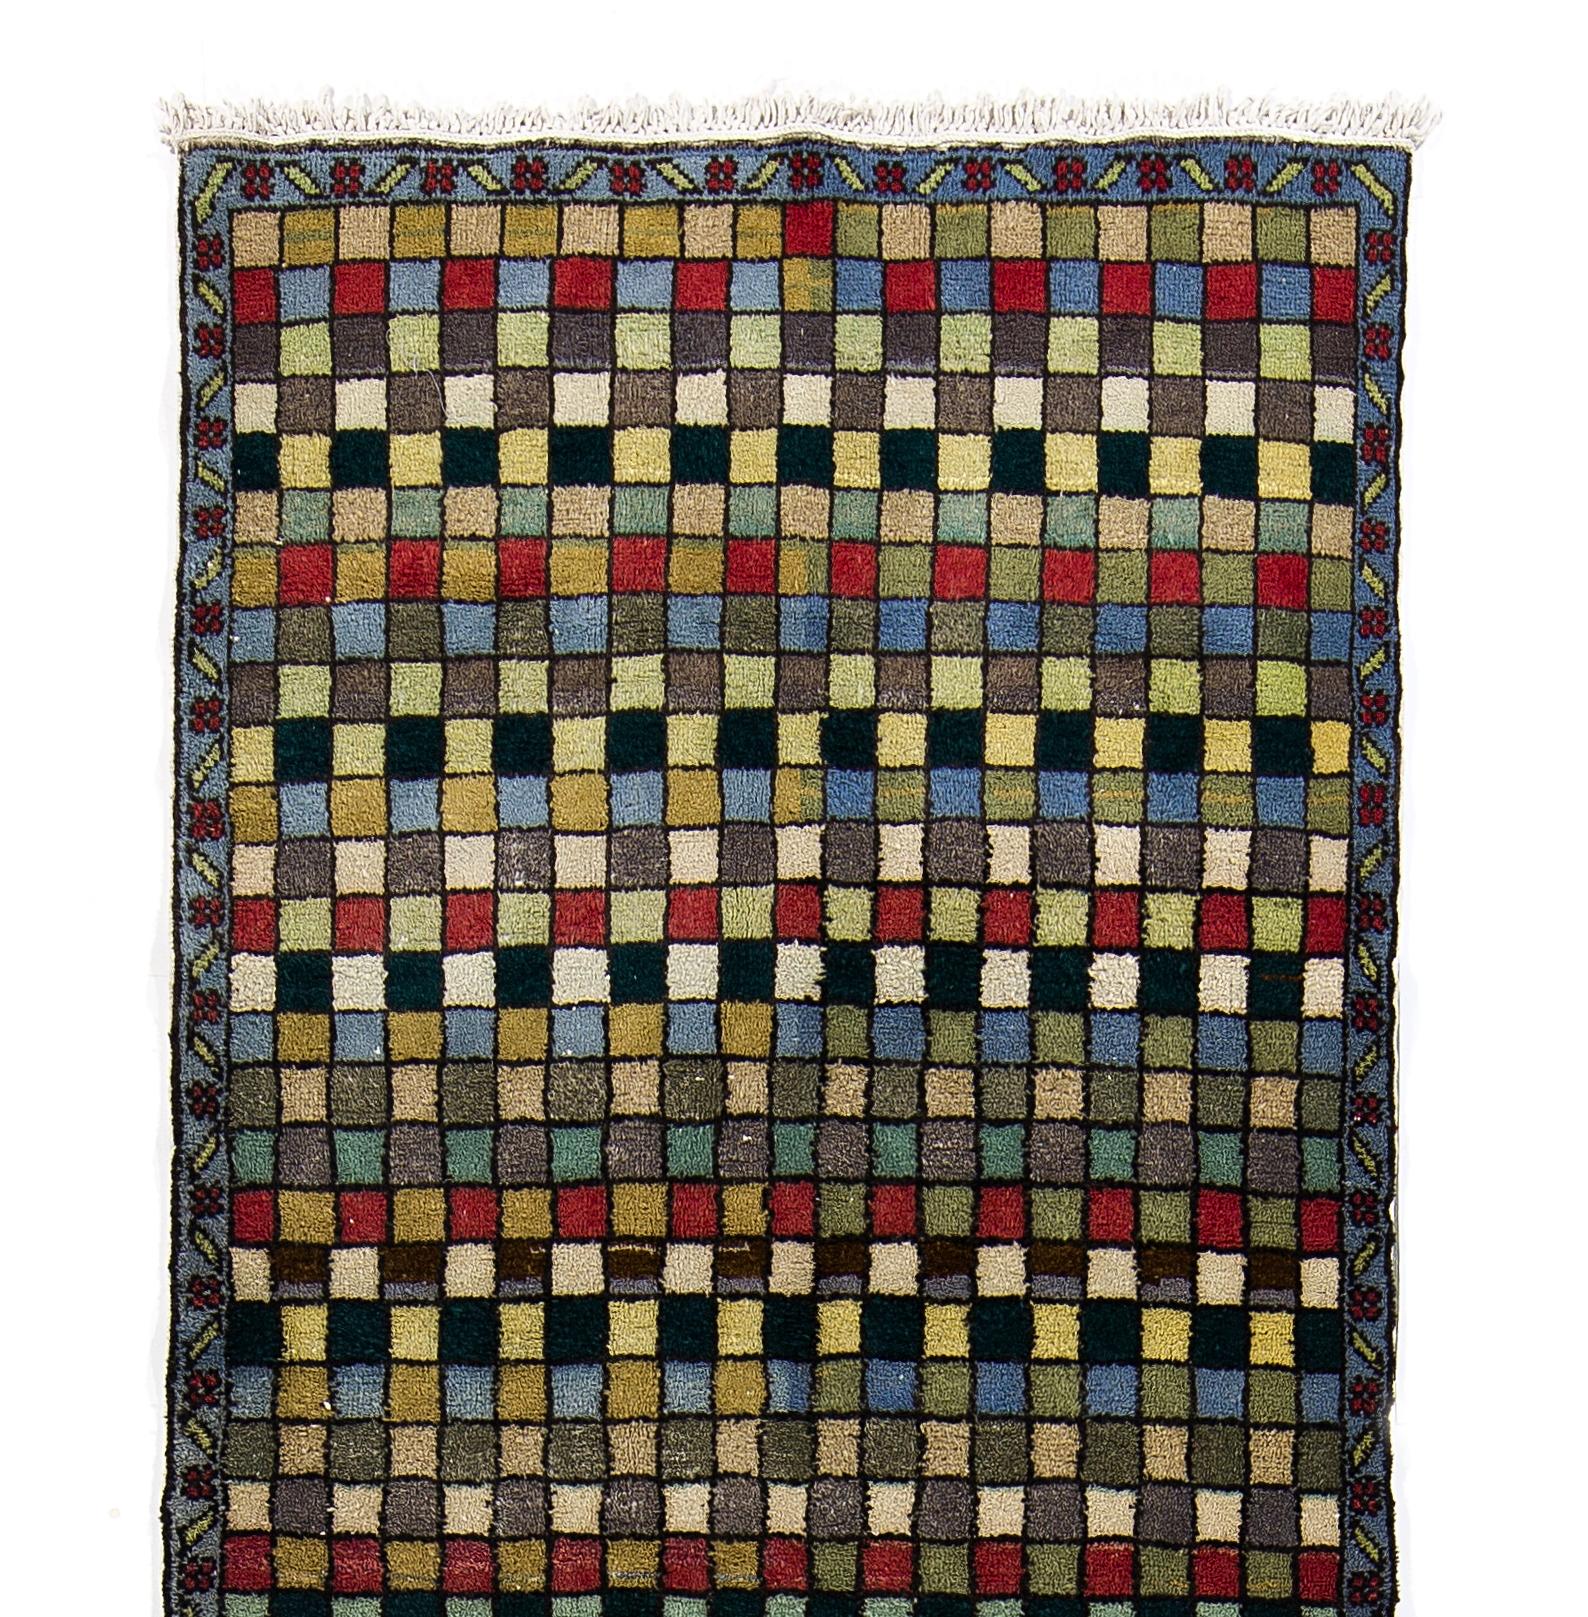 A handmade mid-century 'Tulu' (Turkish word for 'thick piled') runner rug from Konya in Central Turkey. The rug is made of 100% wool, therefore it is very soft and comfortable. Measures: 3.7x12.5 ft.

These simple rugs with geometric modern